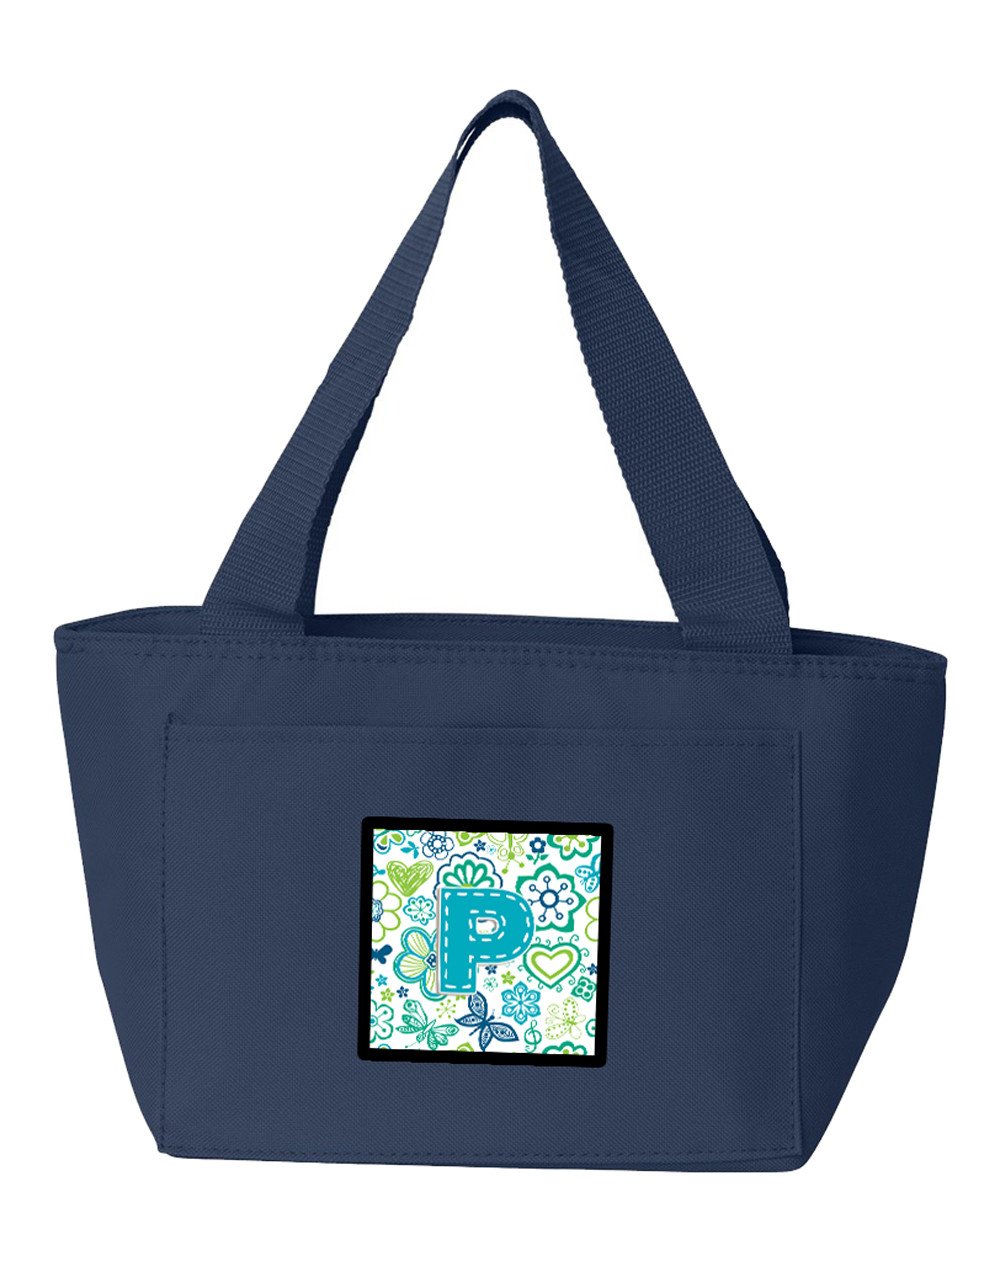 Letter P Flowers and Butterflies Teal Blue Lunch Bag CJ2006-PNA-8808 by Caroline's Treasures